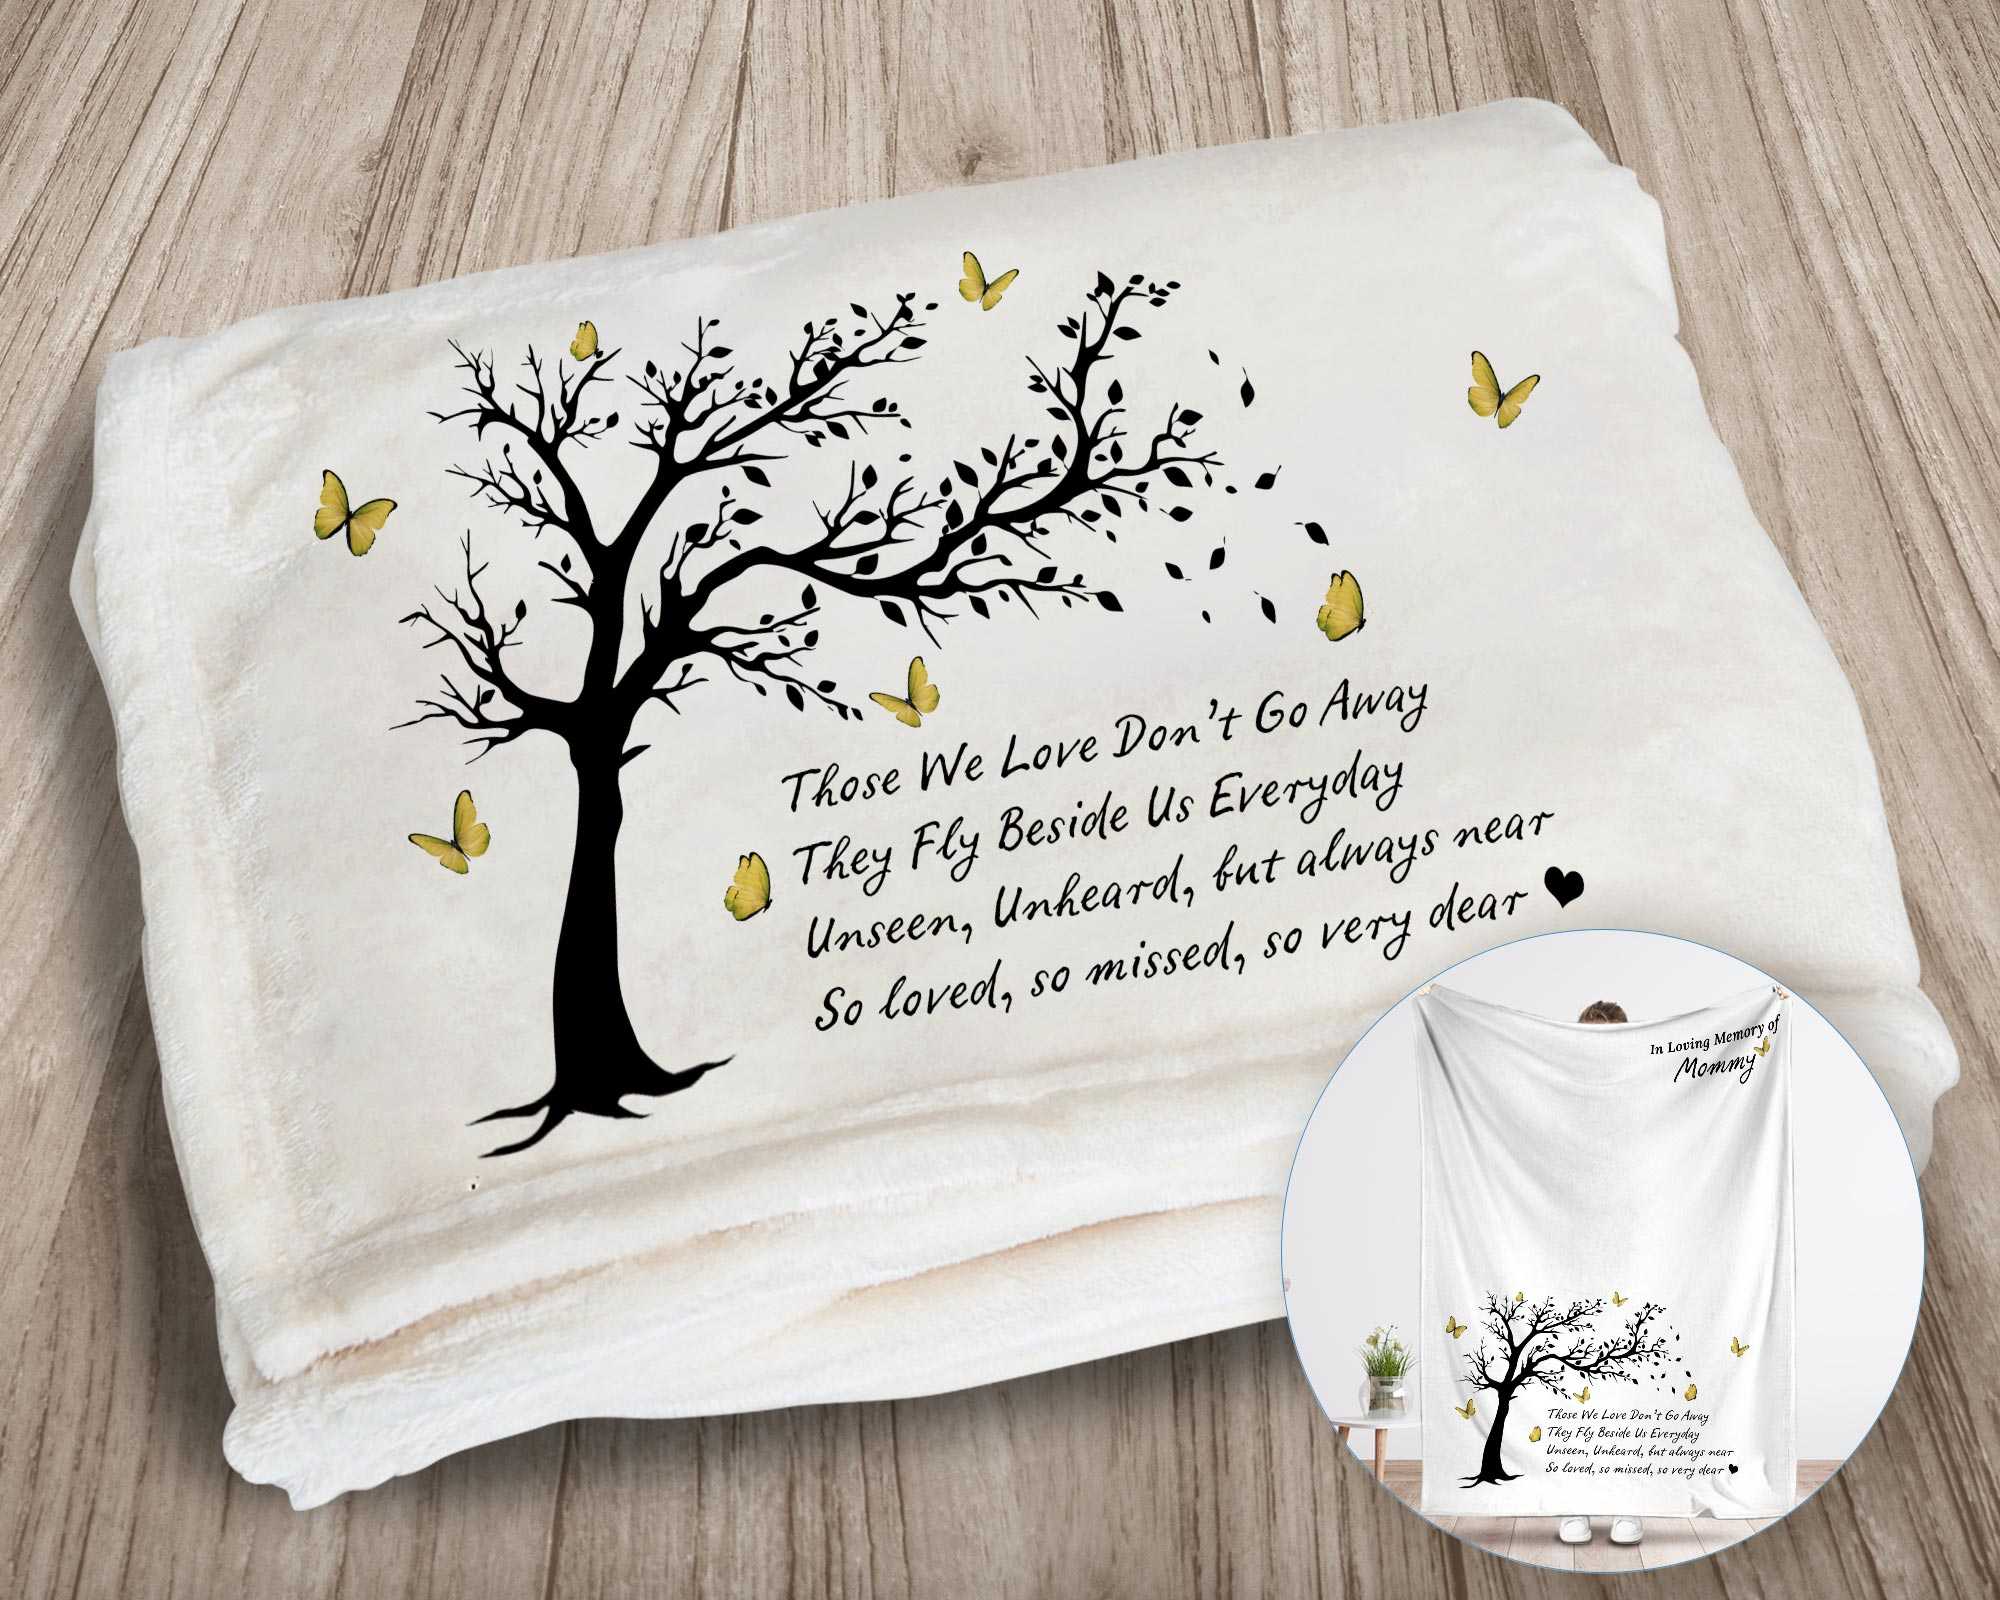 Personalized In Loving Memory Blankets, Memorial Gift For Loss Of Mother, Those We Love Don't Go Away Blanket